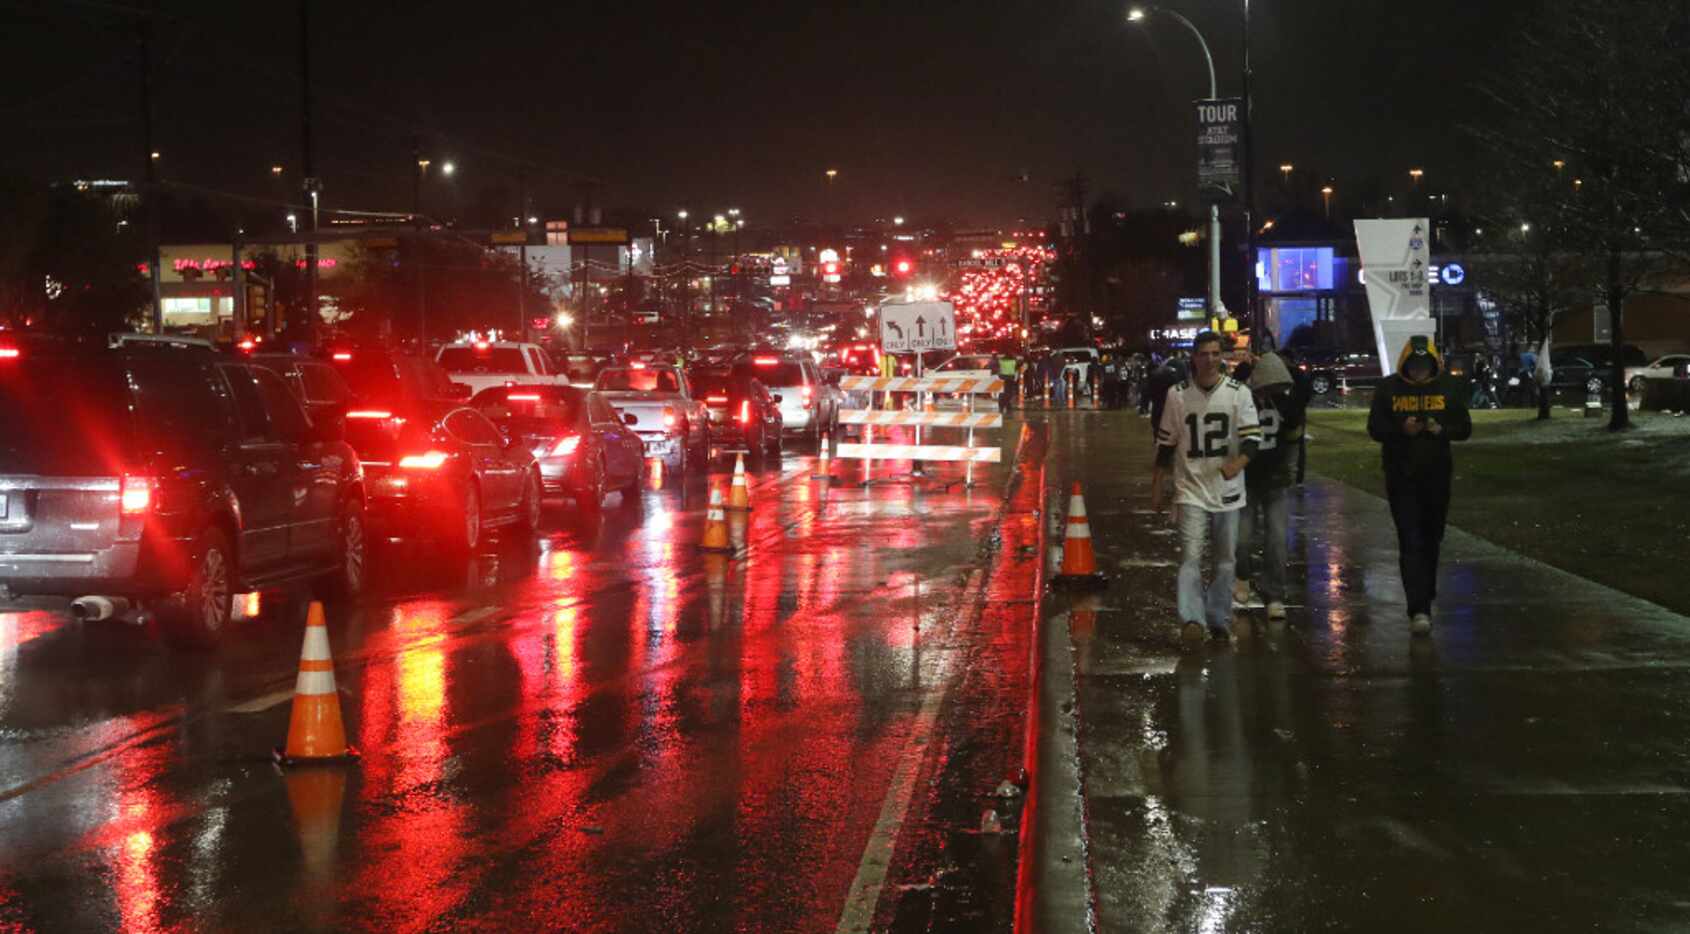 Traffic on Collins Street in front of AT&T Stadium as fans drive in the rain after the game.